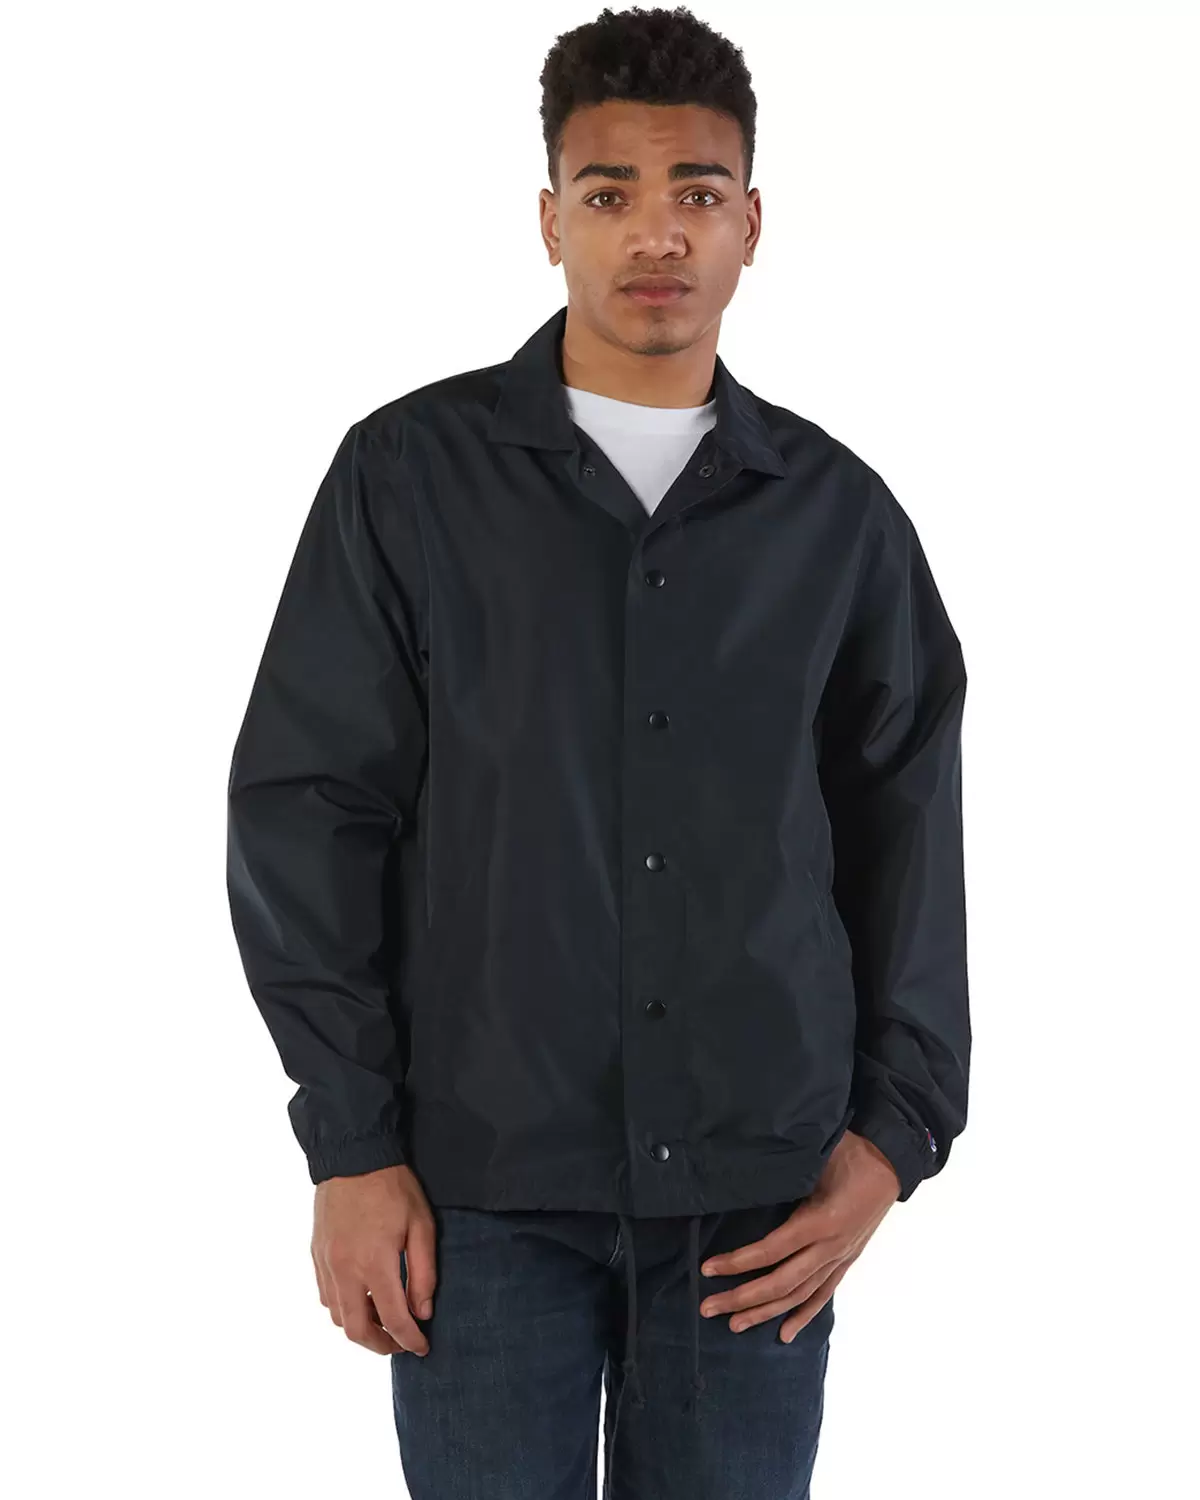 Champion Clothing CO126 Coach's Jacket - From $37.15